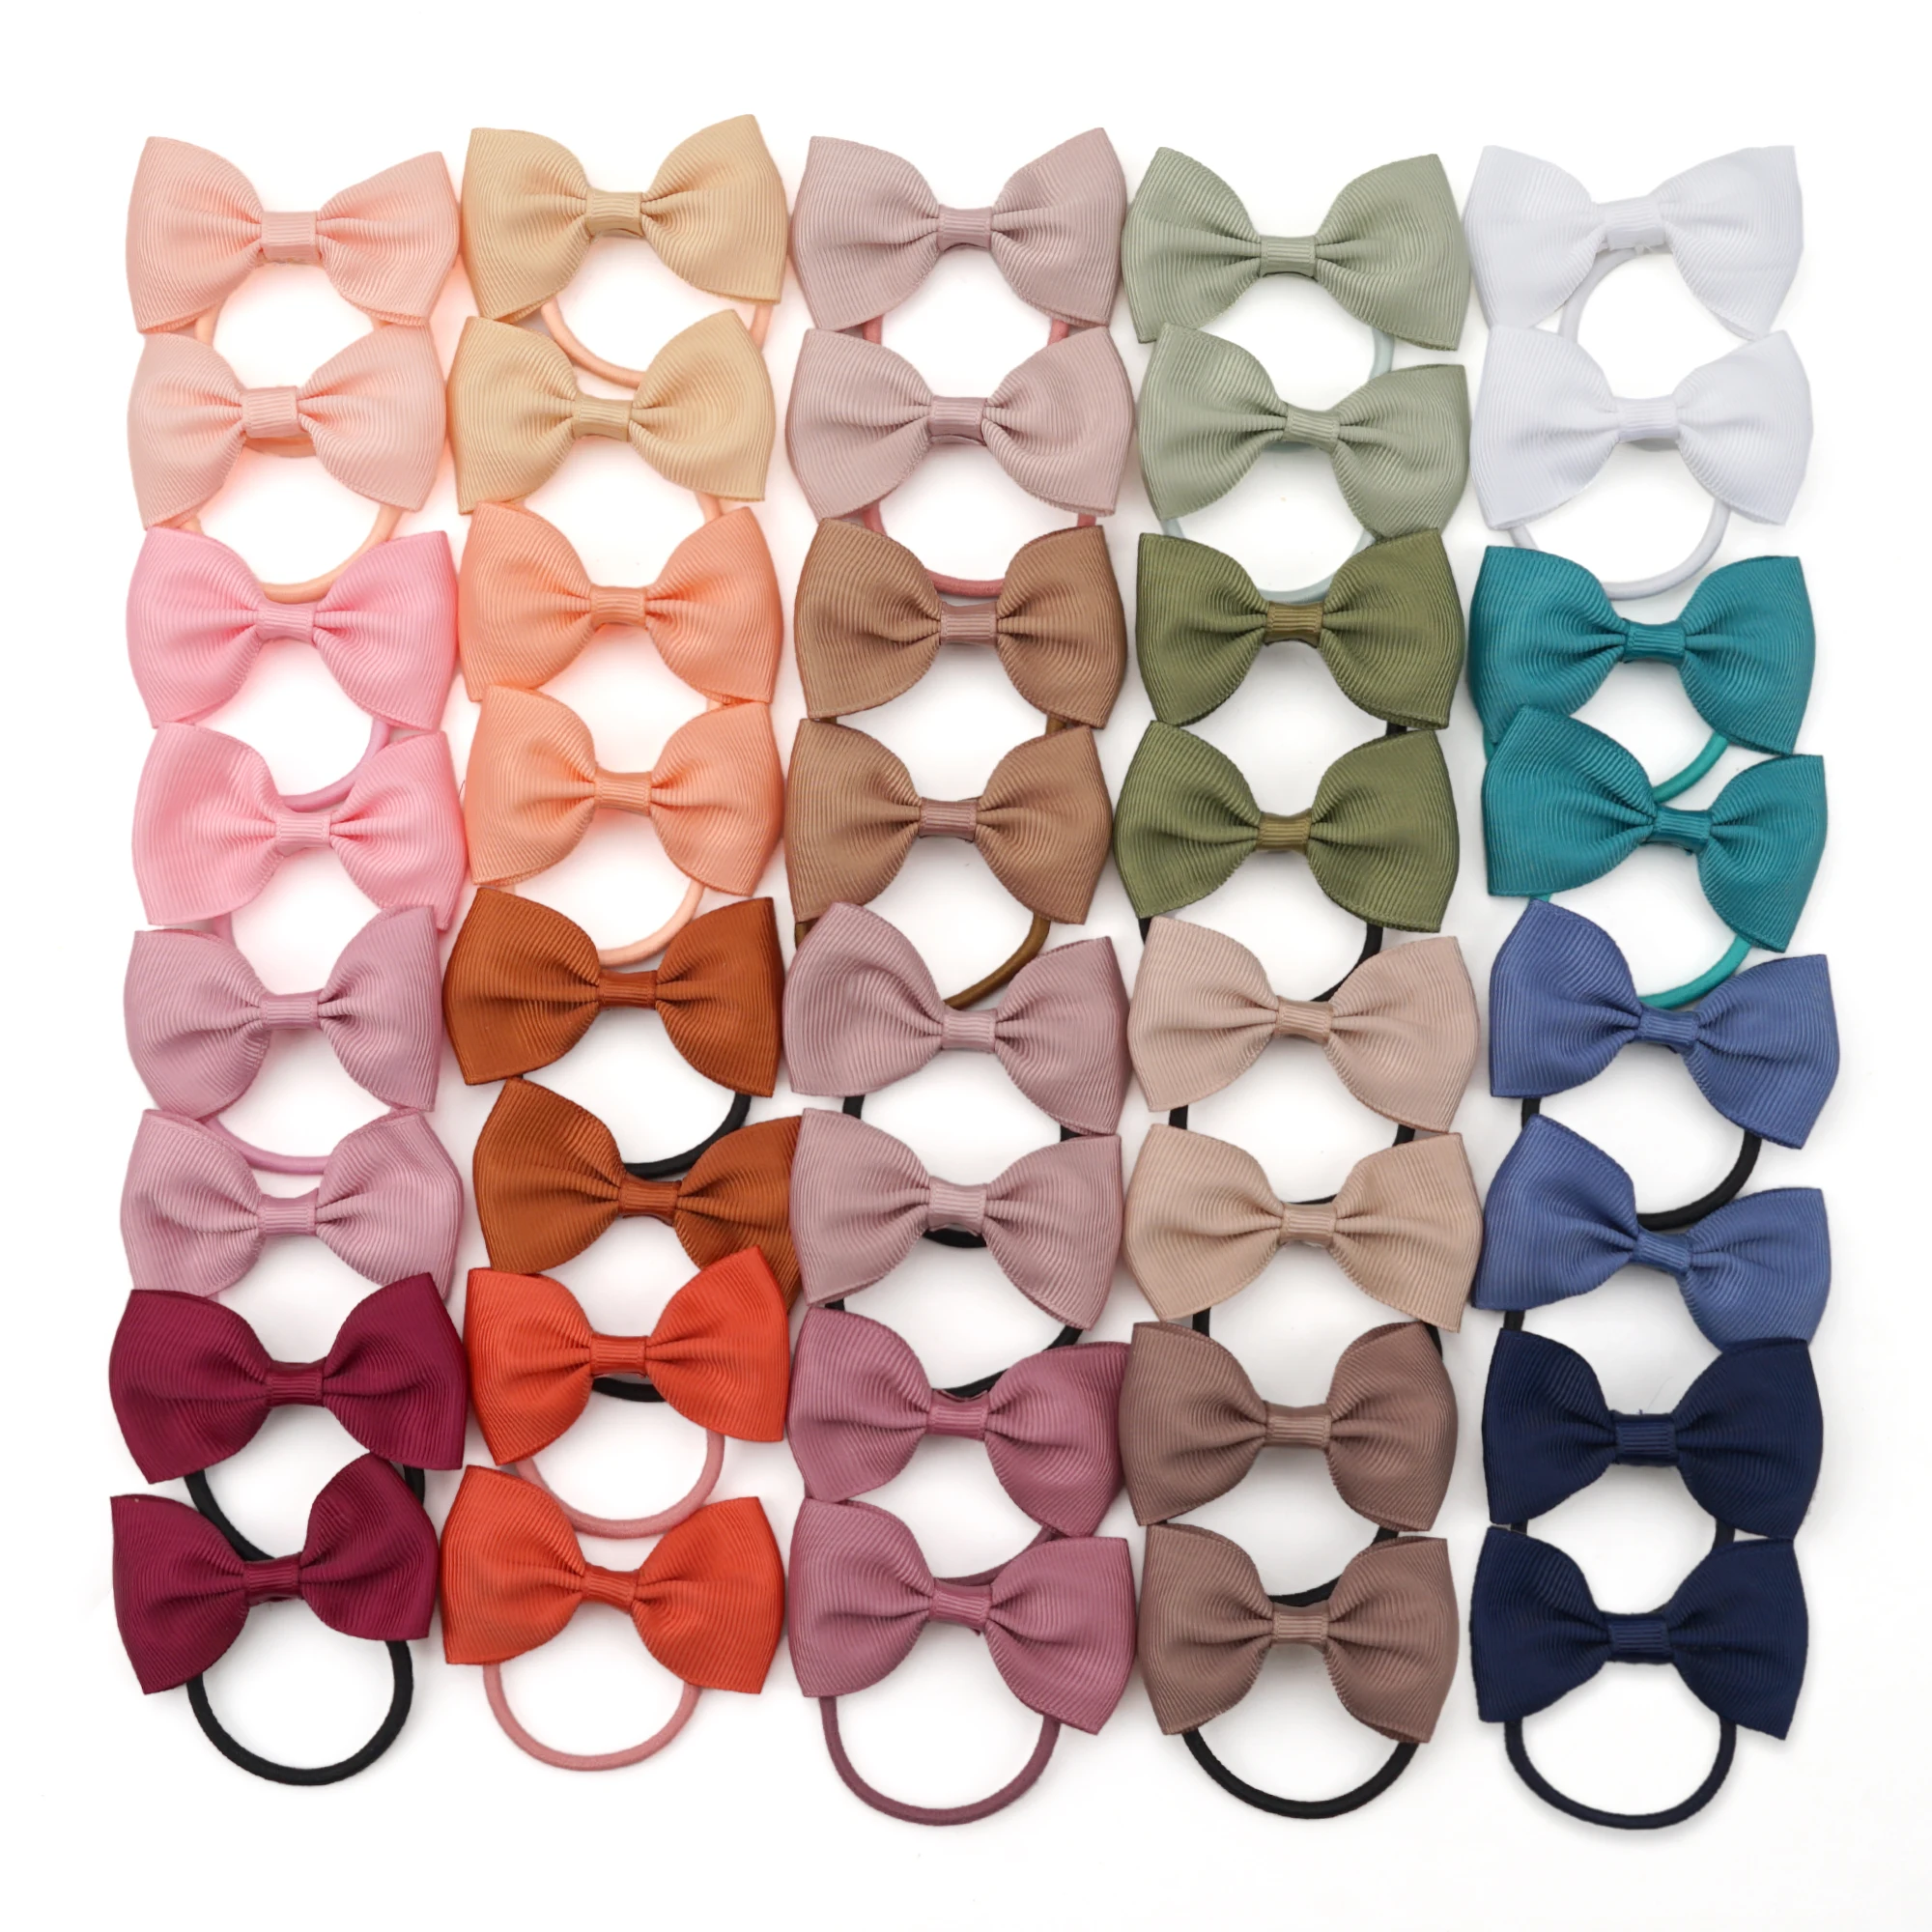 10/20pcs 2.75" Boutique Hair Bows Tie Baby Girls Kids Children Rubber Band Ribbon Hair bands